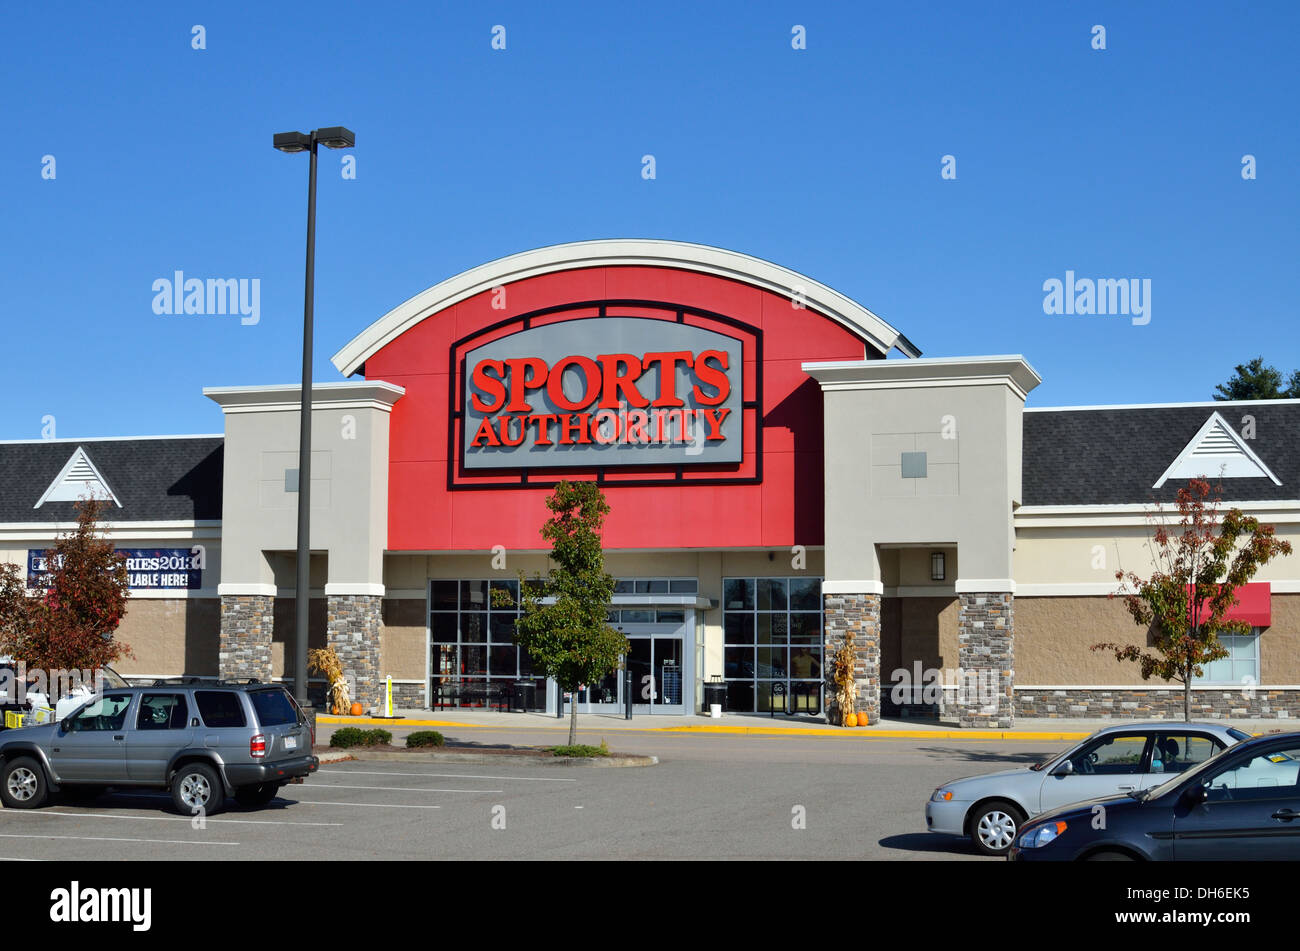 Exterior of a Sports Authority retail store with cars in parking lot. USA Stock Photo